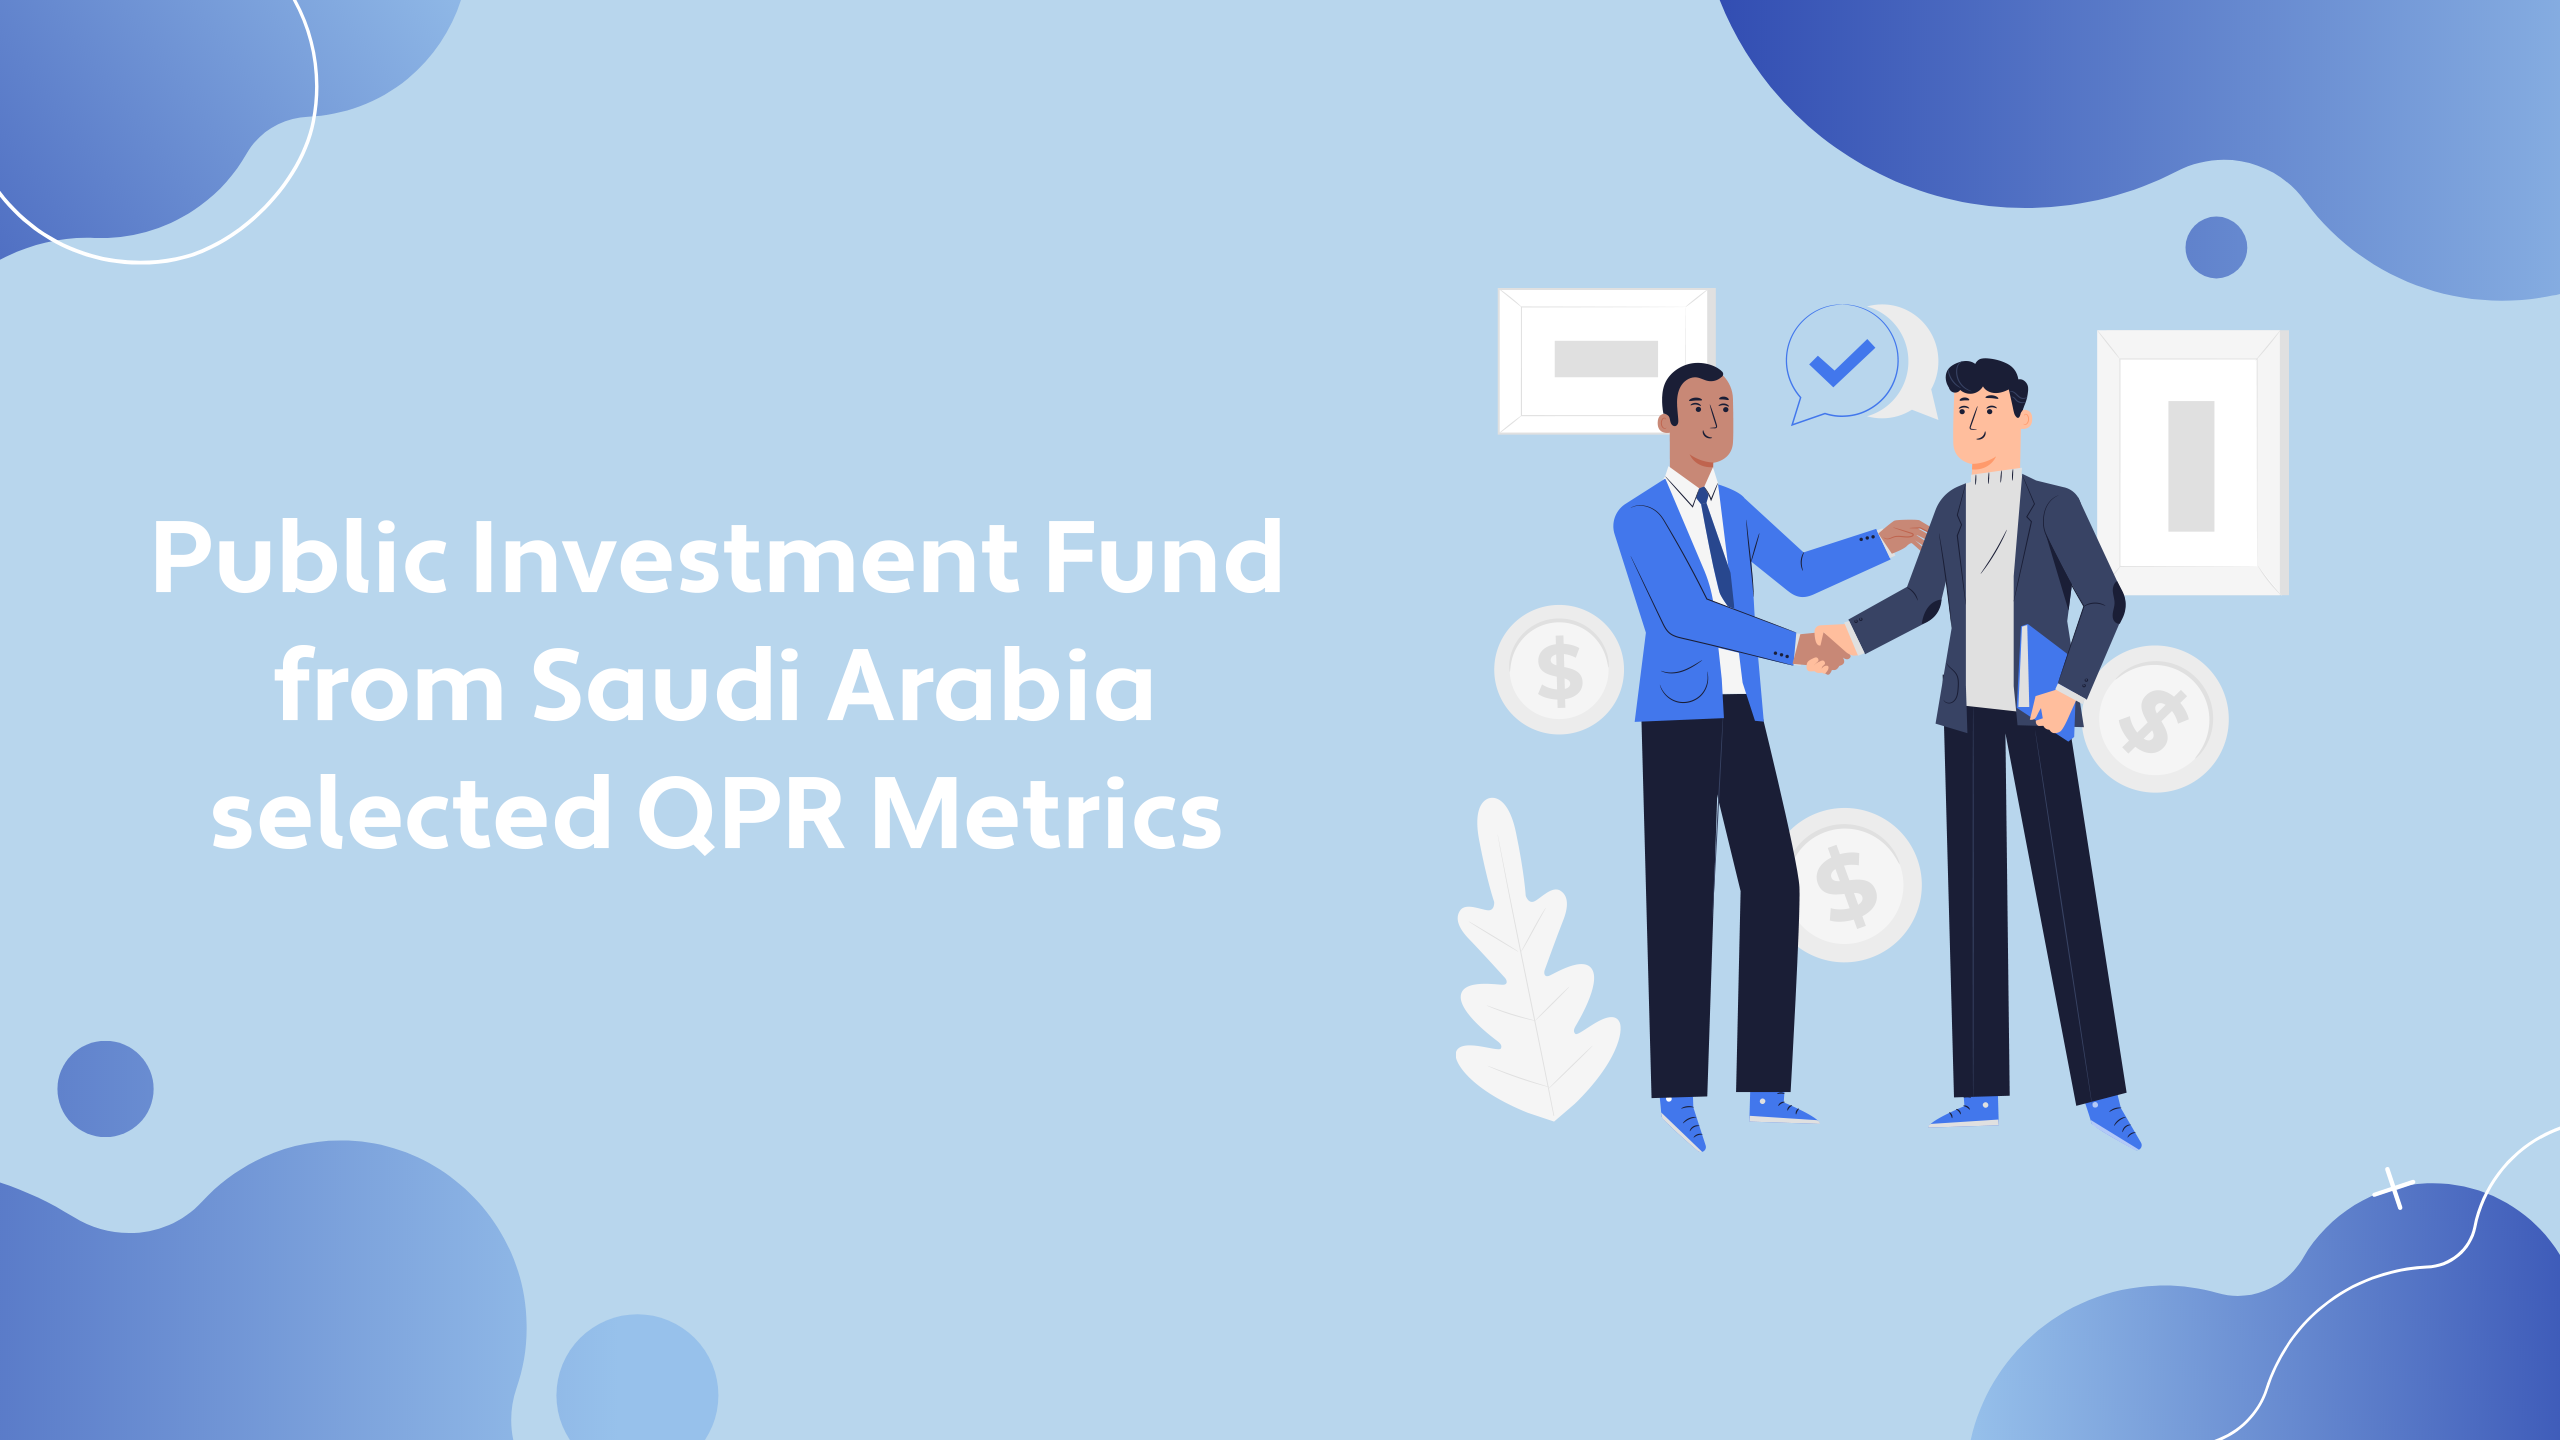 Public Investment Fund from Saudi Arabia has selected QPR Strategy and Performance Management Software